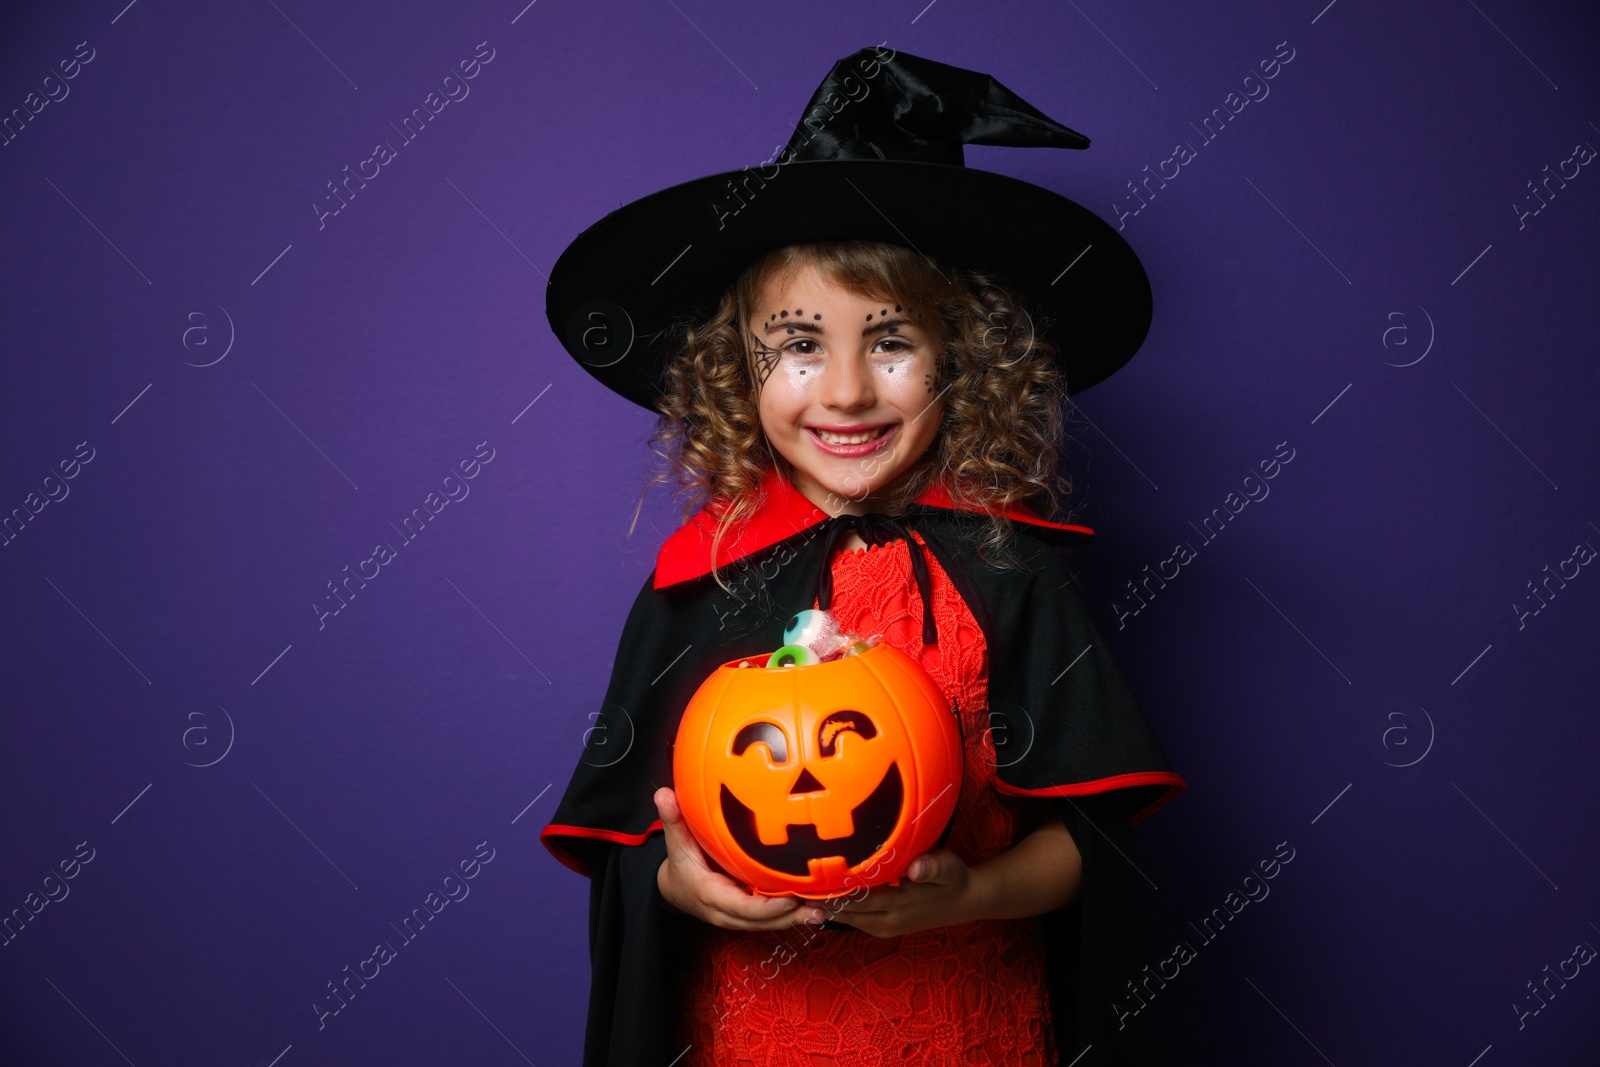 Photo of Cute little girl with pumpkin candy bucket wearing Halloween costume on purple background